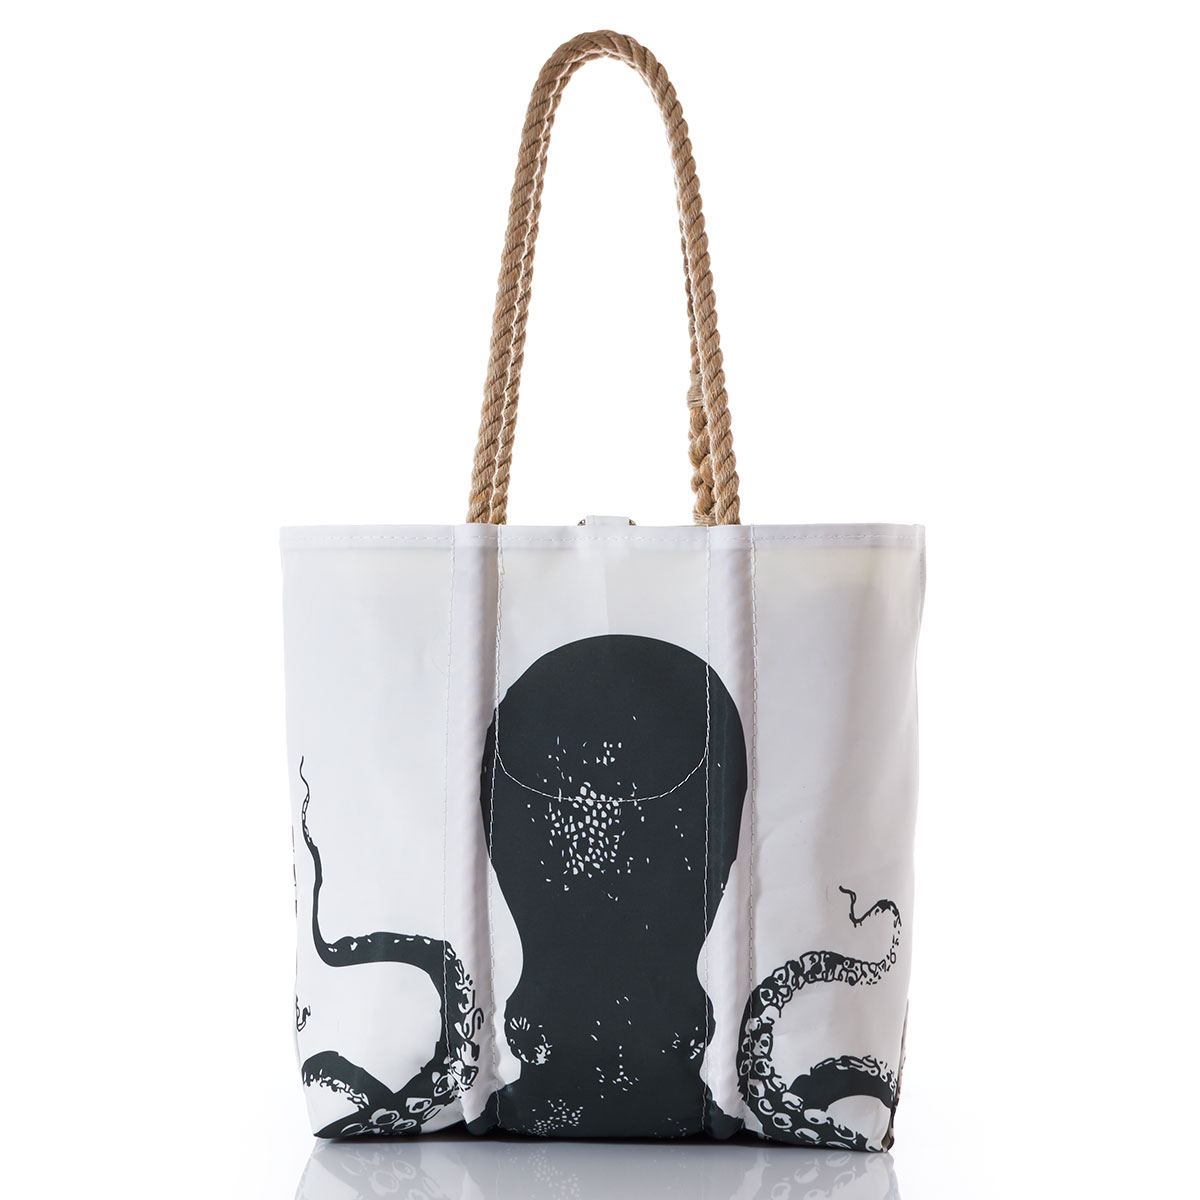 back view showing octopus head: black octopus legs reach up to the tope of this recycled sail cloth tote, printed on a white background, with hemp rope handles